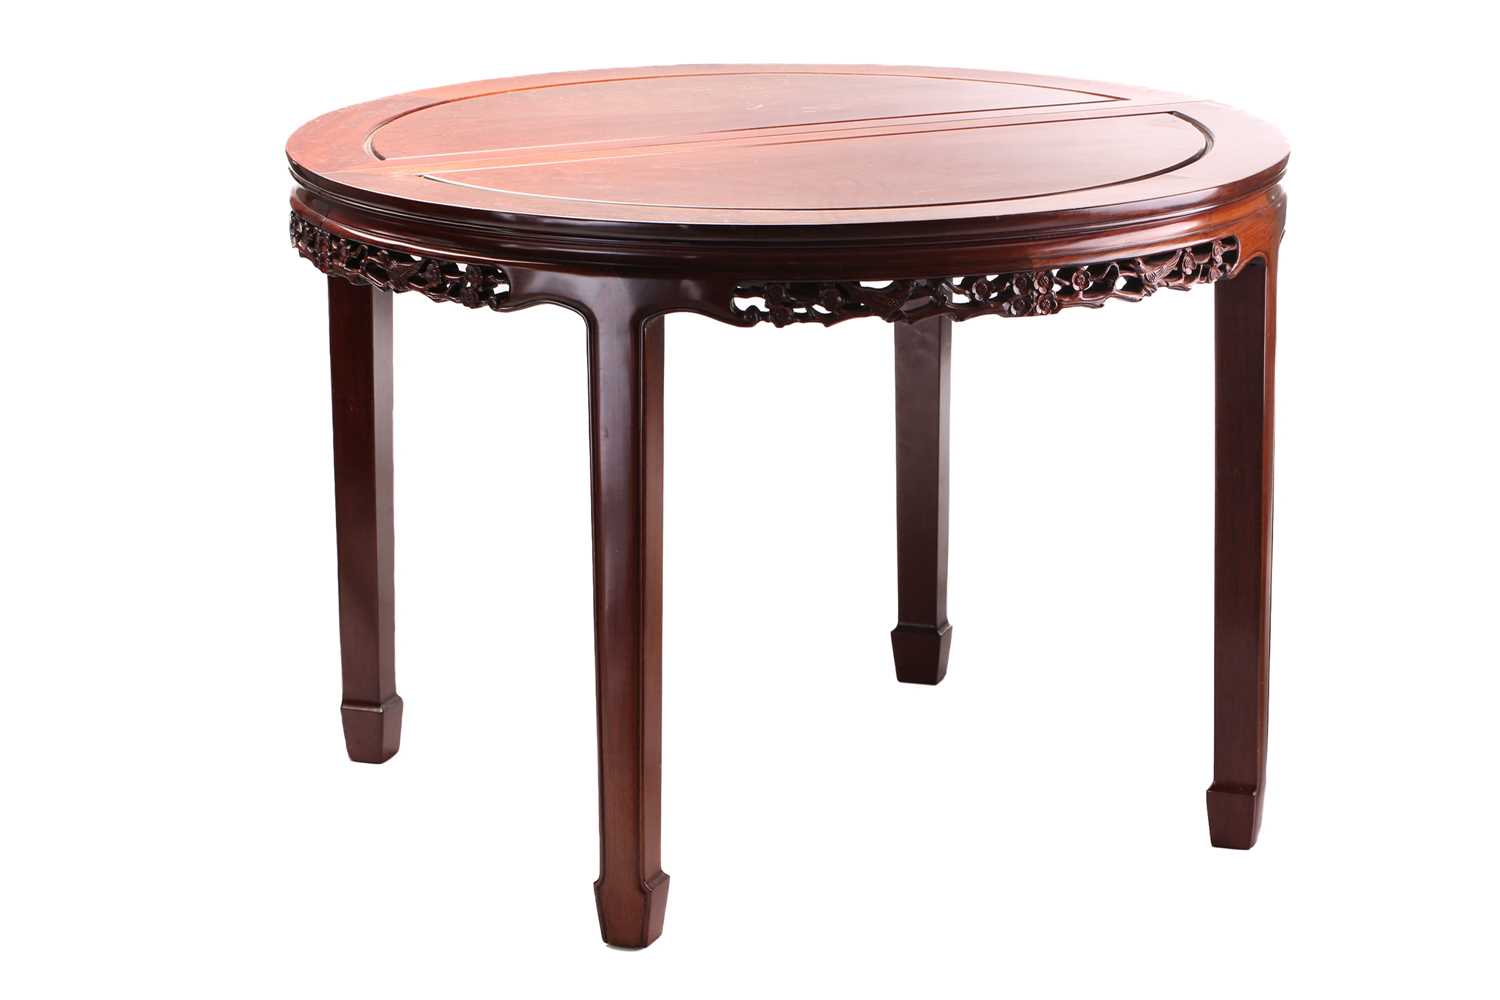 A 20th-century Chinese padouk wood extending circular dining table with single leaf insert and six - Image 4 of 10